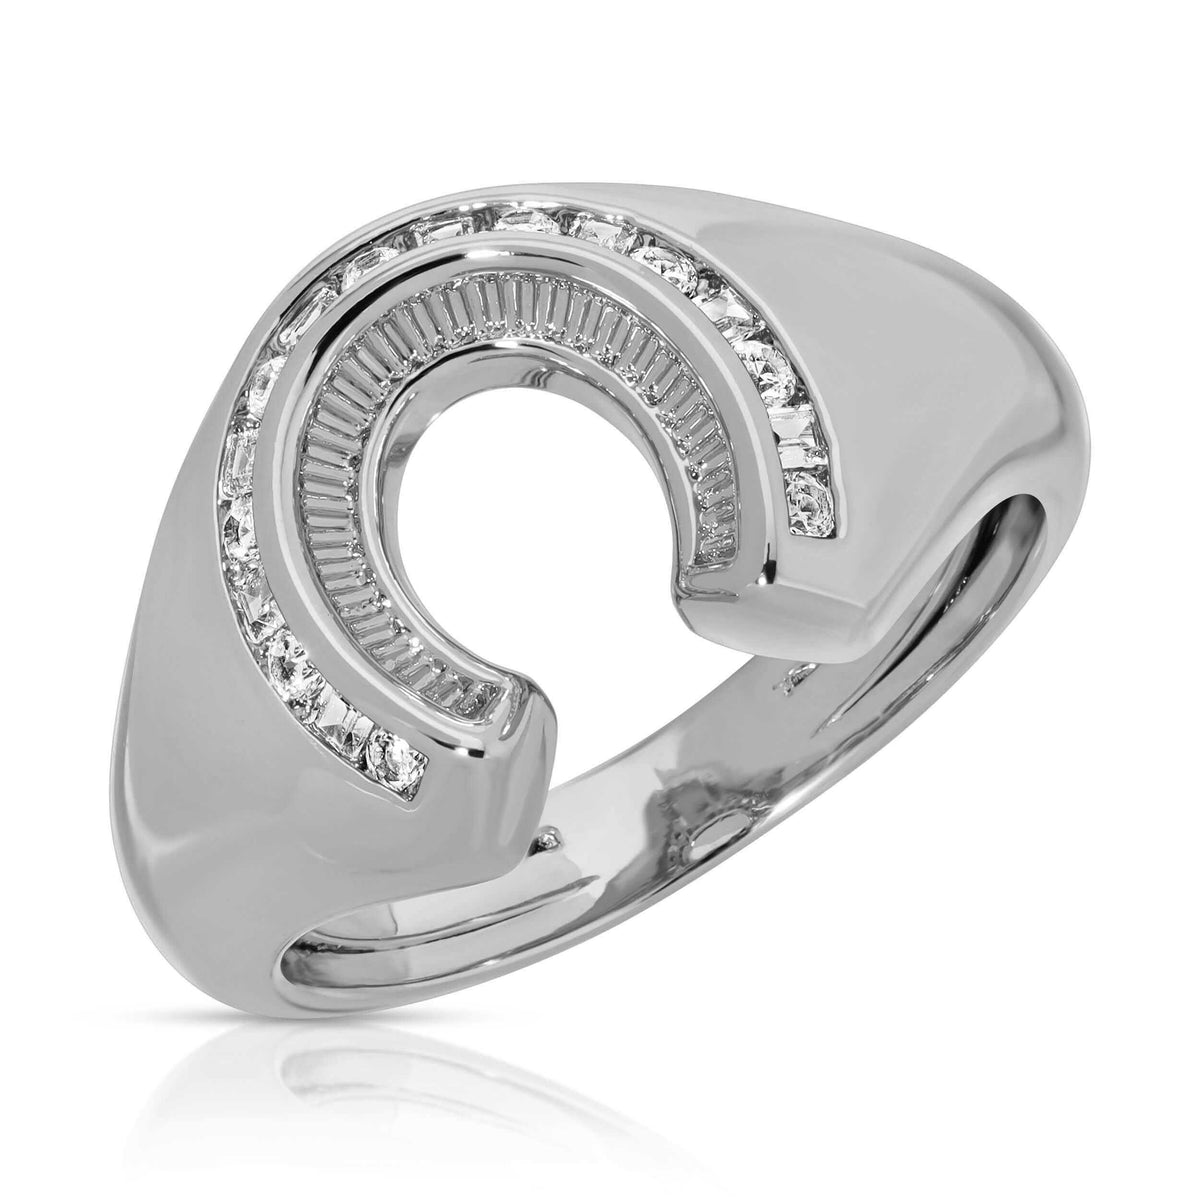 Good Fortune Horseshoe Signet Ring- Gold or Silver